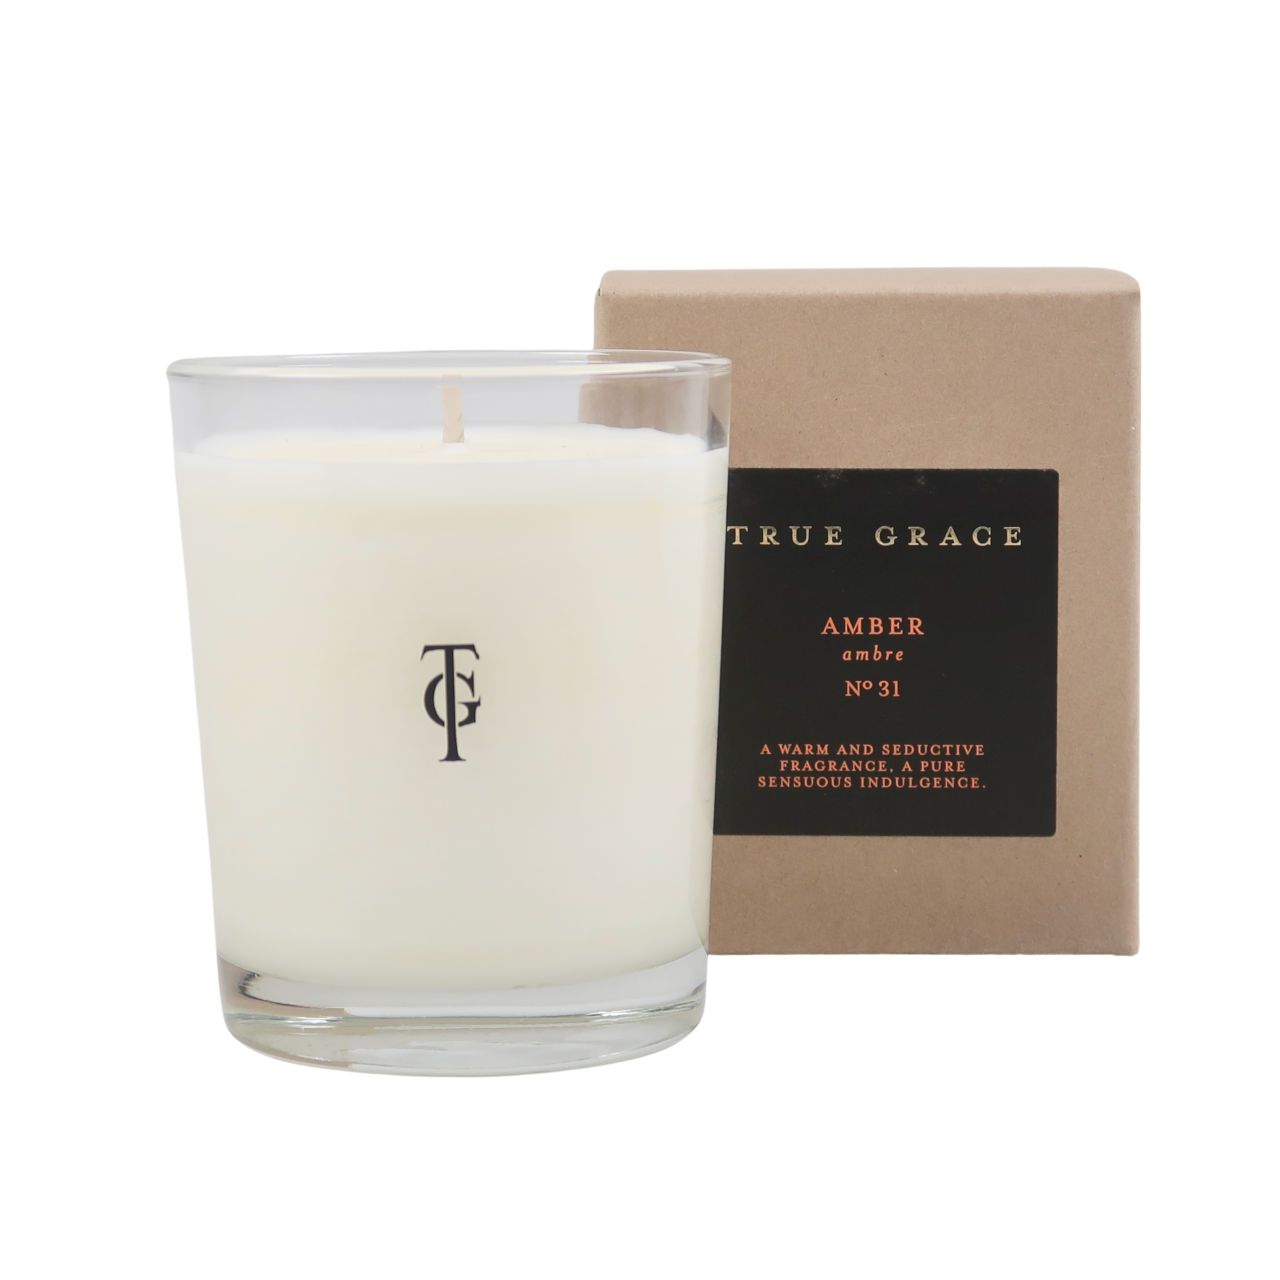 True Grace Amber Scented Candle by True Grace